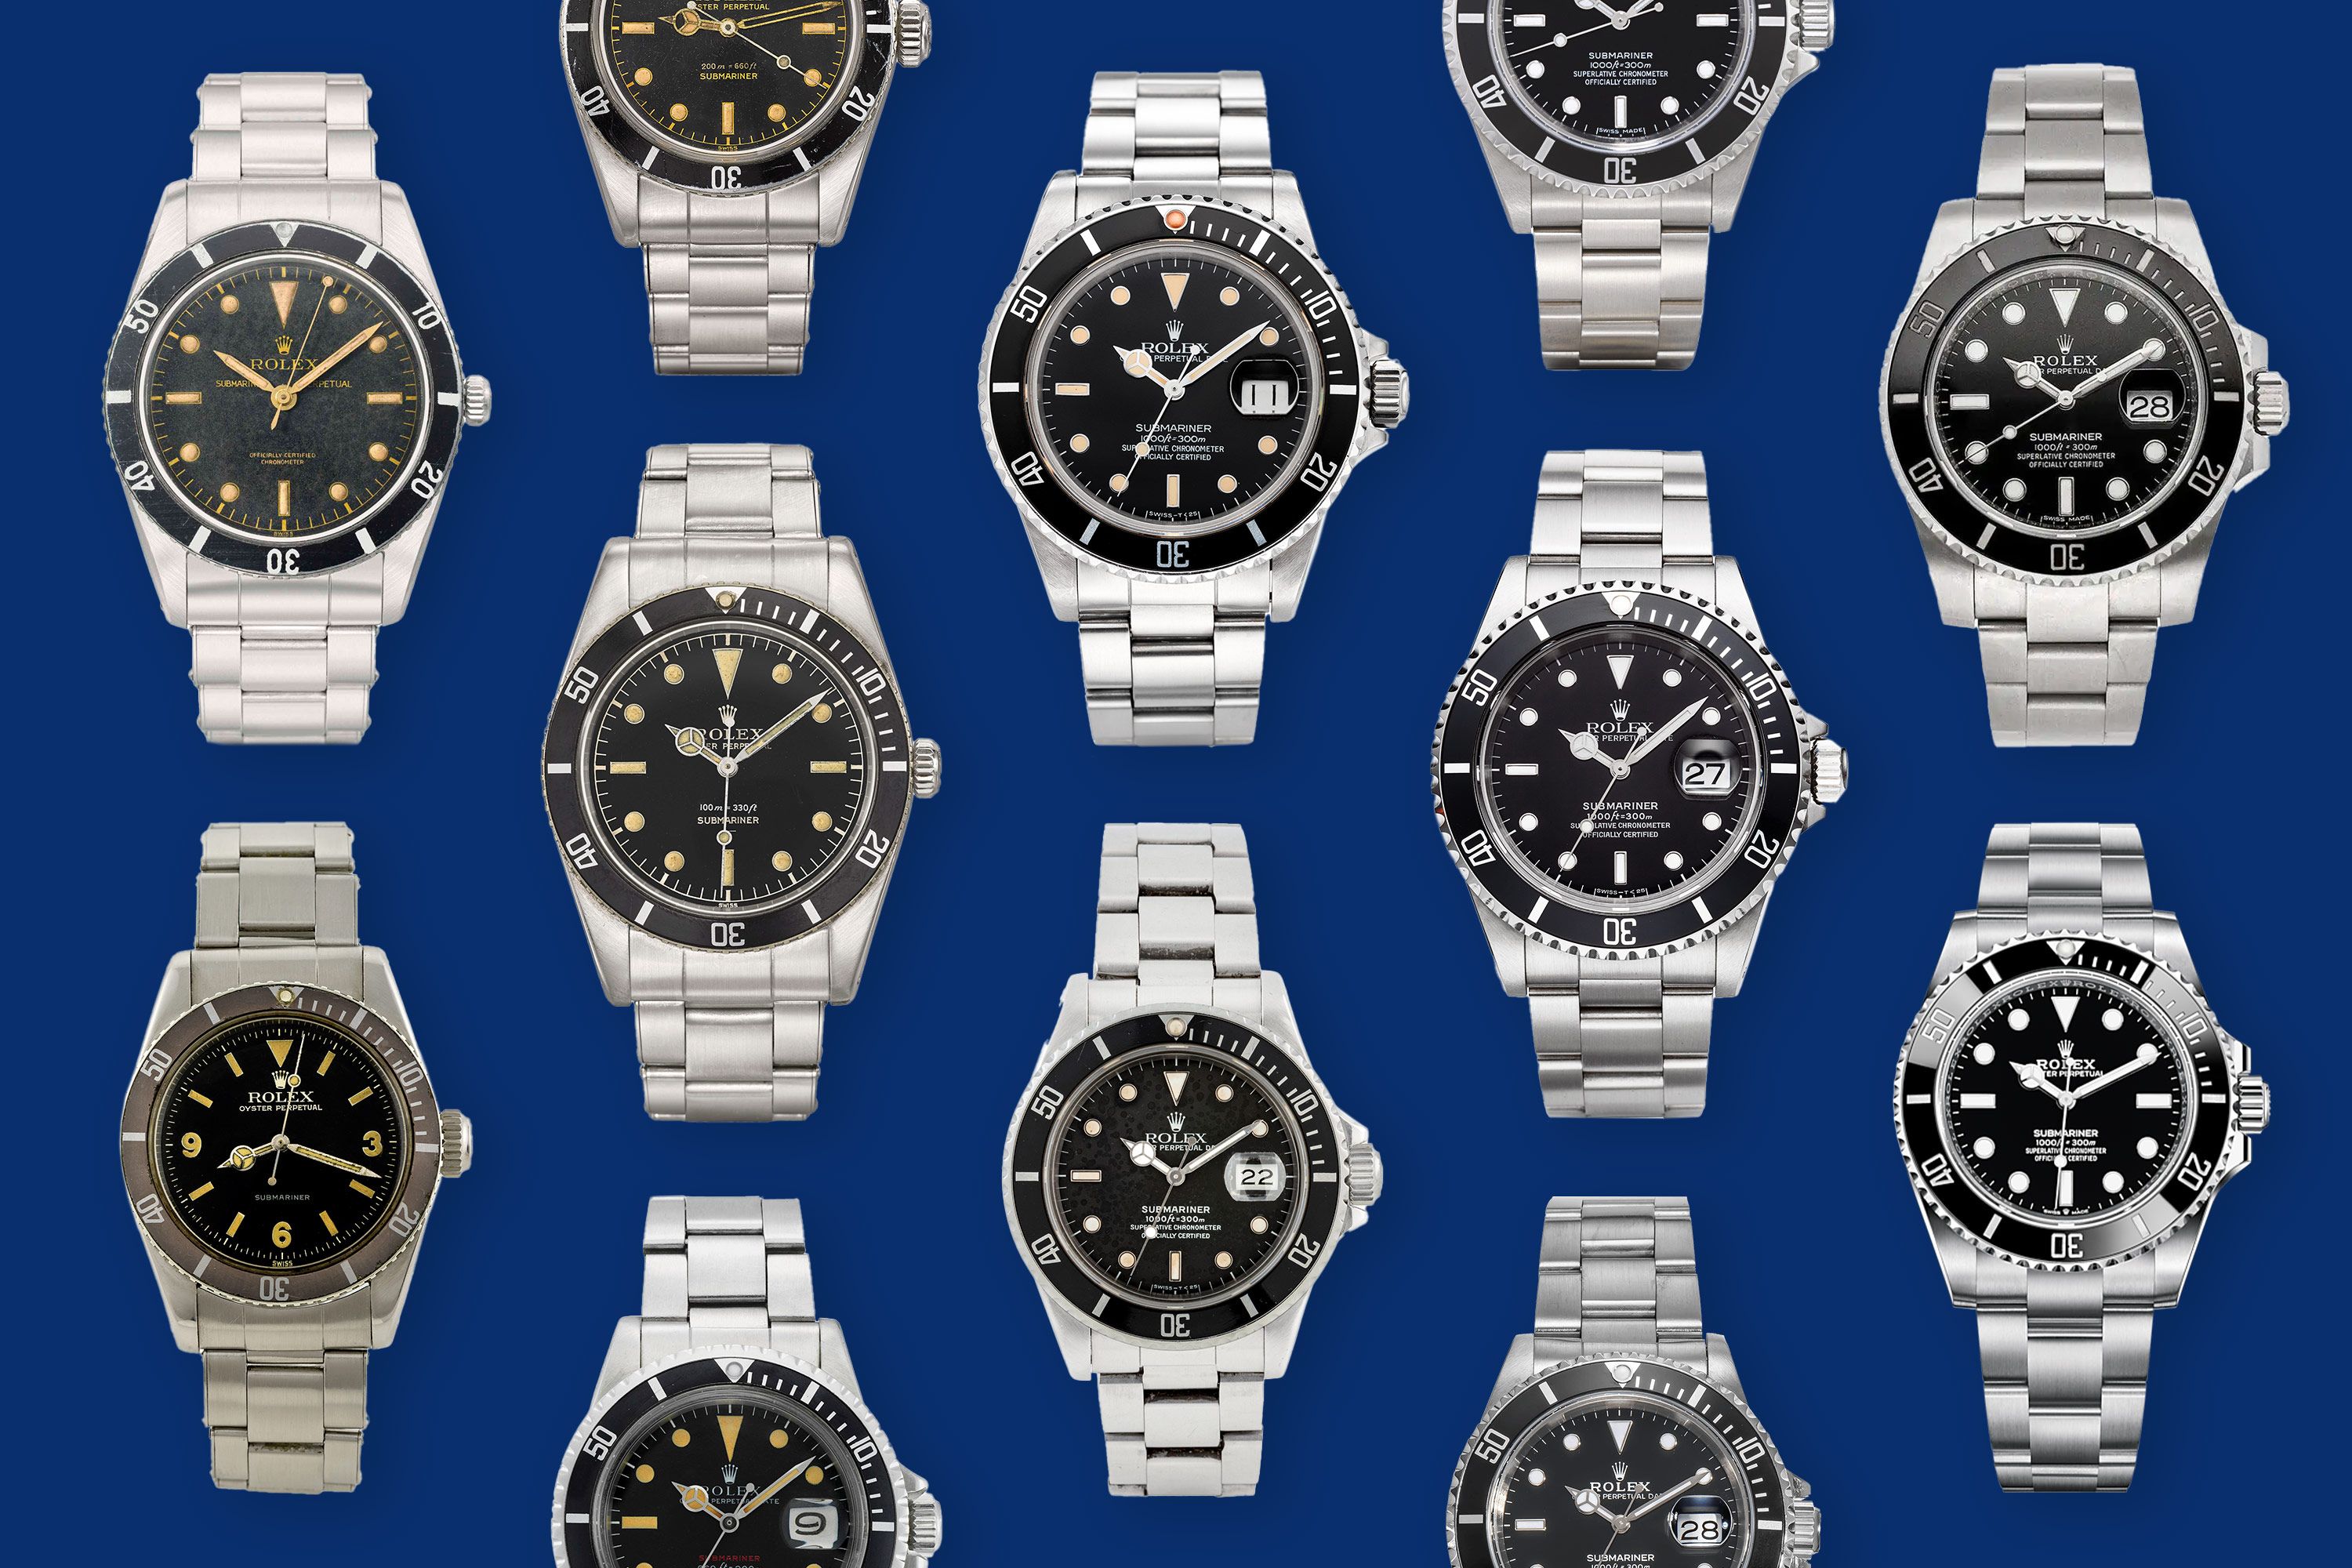 Introducing: The Rolex Submariner Date In 41mm (All Seven